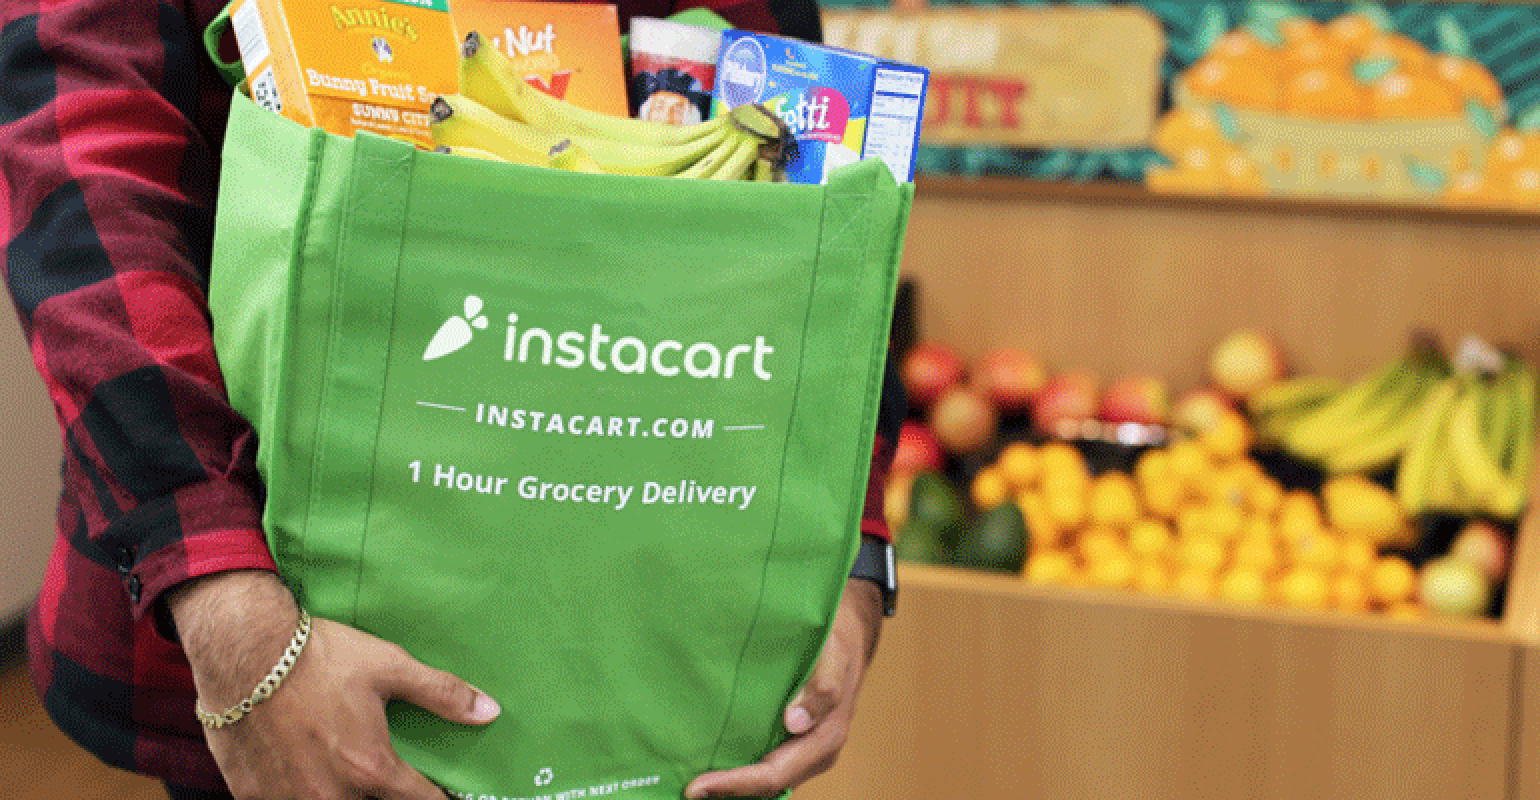 Is Instacart Safe? Here’s What You Need to Know